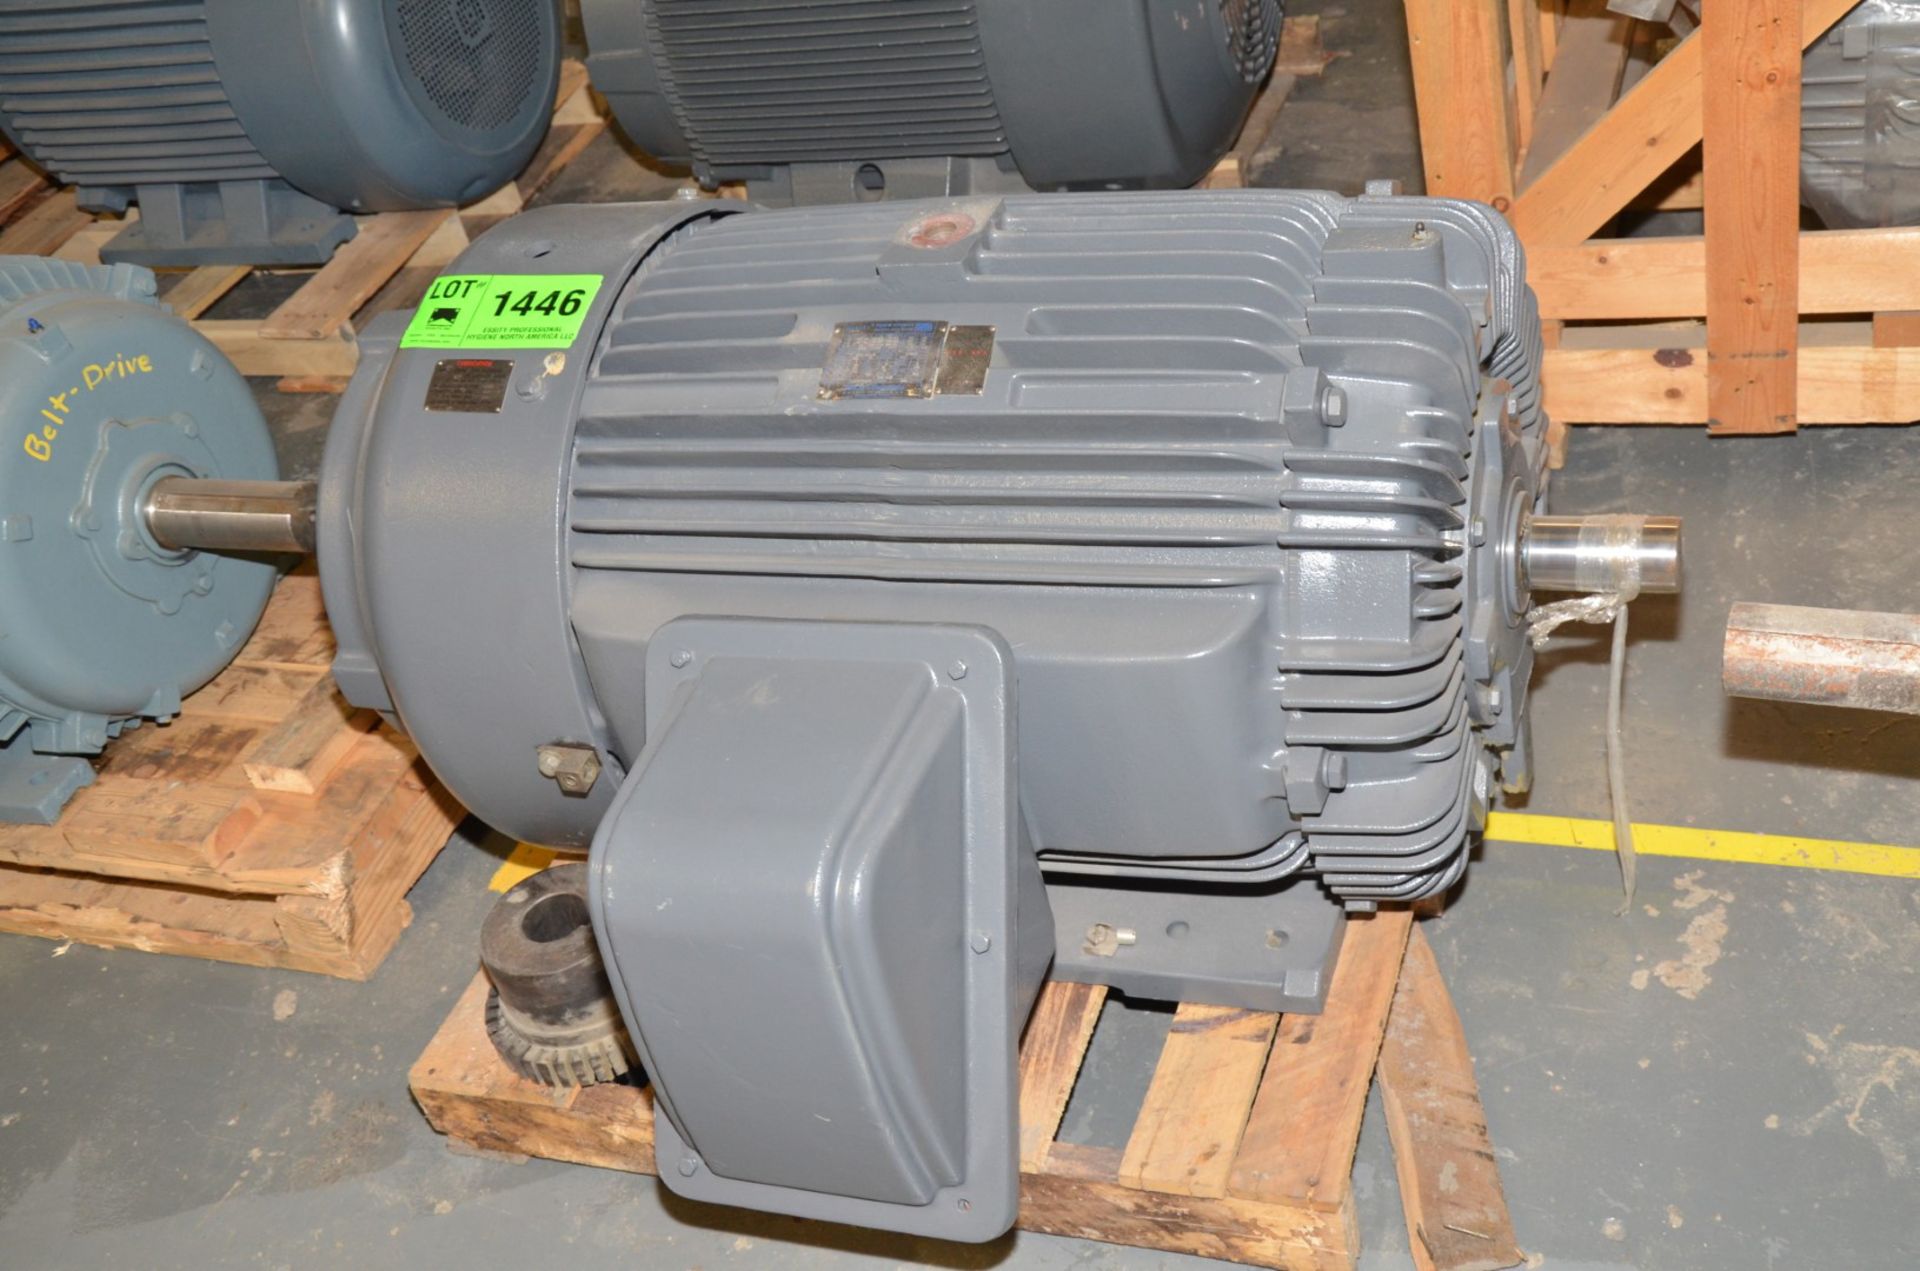 TECO 200 HP 2700 RPM 460V ELECTRIC MOTOR [RIGGING FEE FOR LOT #1446 - $50 USD PLUS APPLICABLE